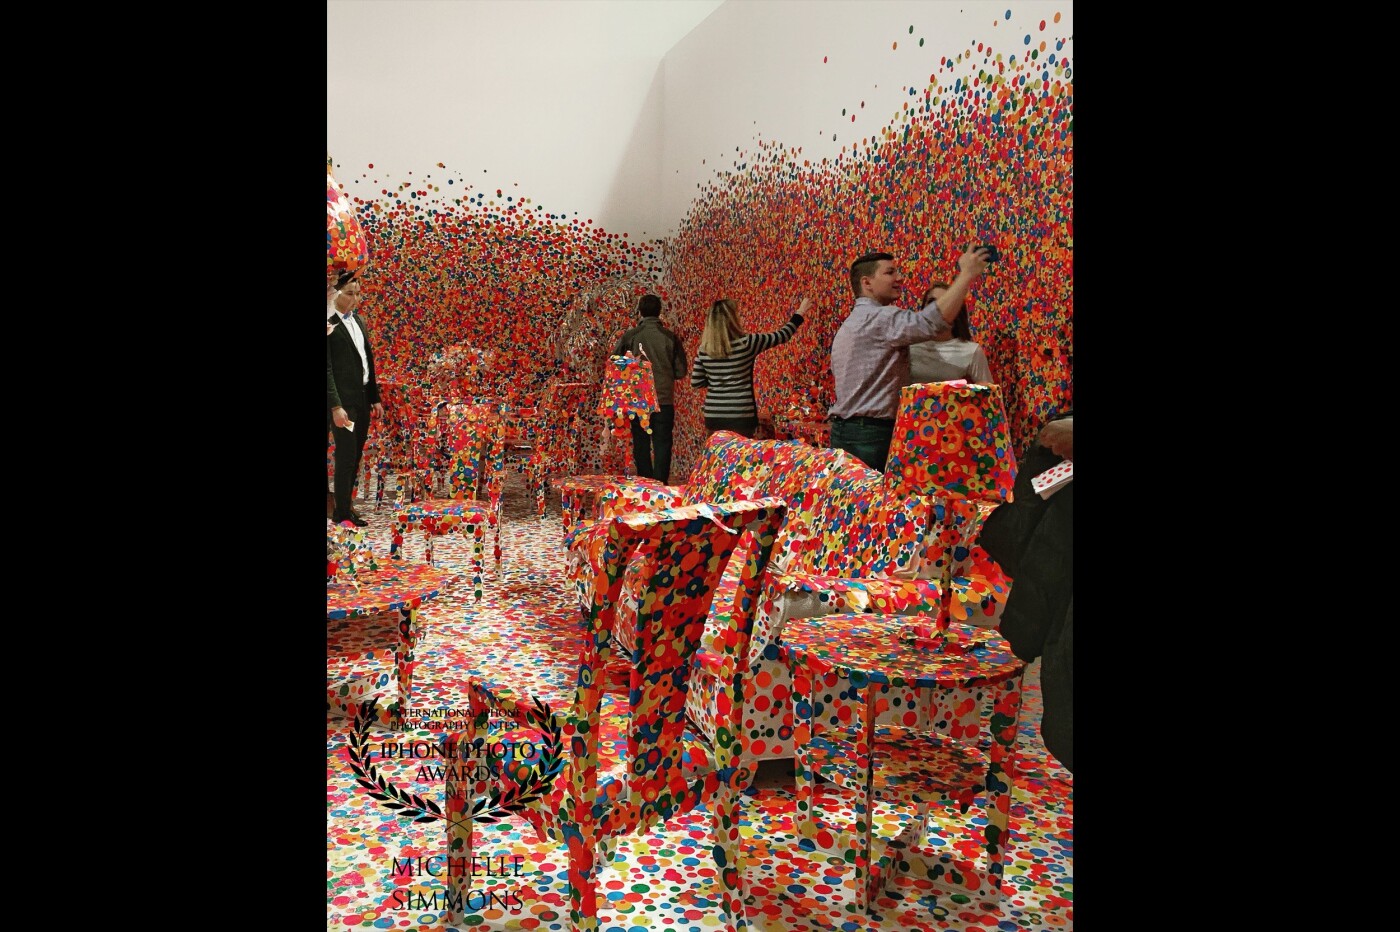 This photograph was taken in the last room of the great Yayoi Kusama Infinity Mirrors exhibition at the Atlanta High Museum. Before entering the last room, museum-goers are given a small page of sticky polka dots to place wherever they please. As you can see from the photo, this was taken after the exhibit had been running for several weeks. It was a great interactive experience. 